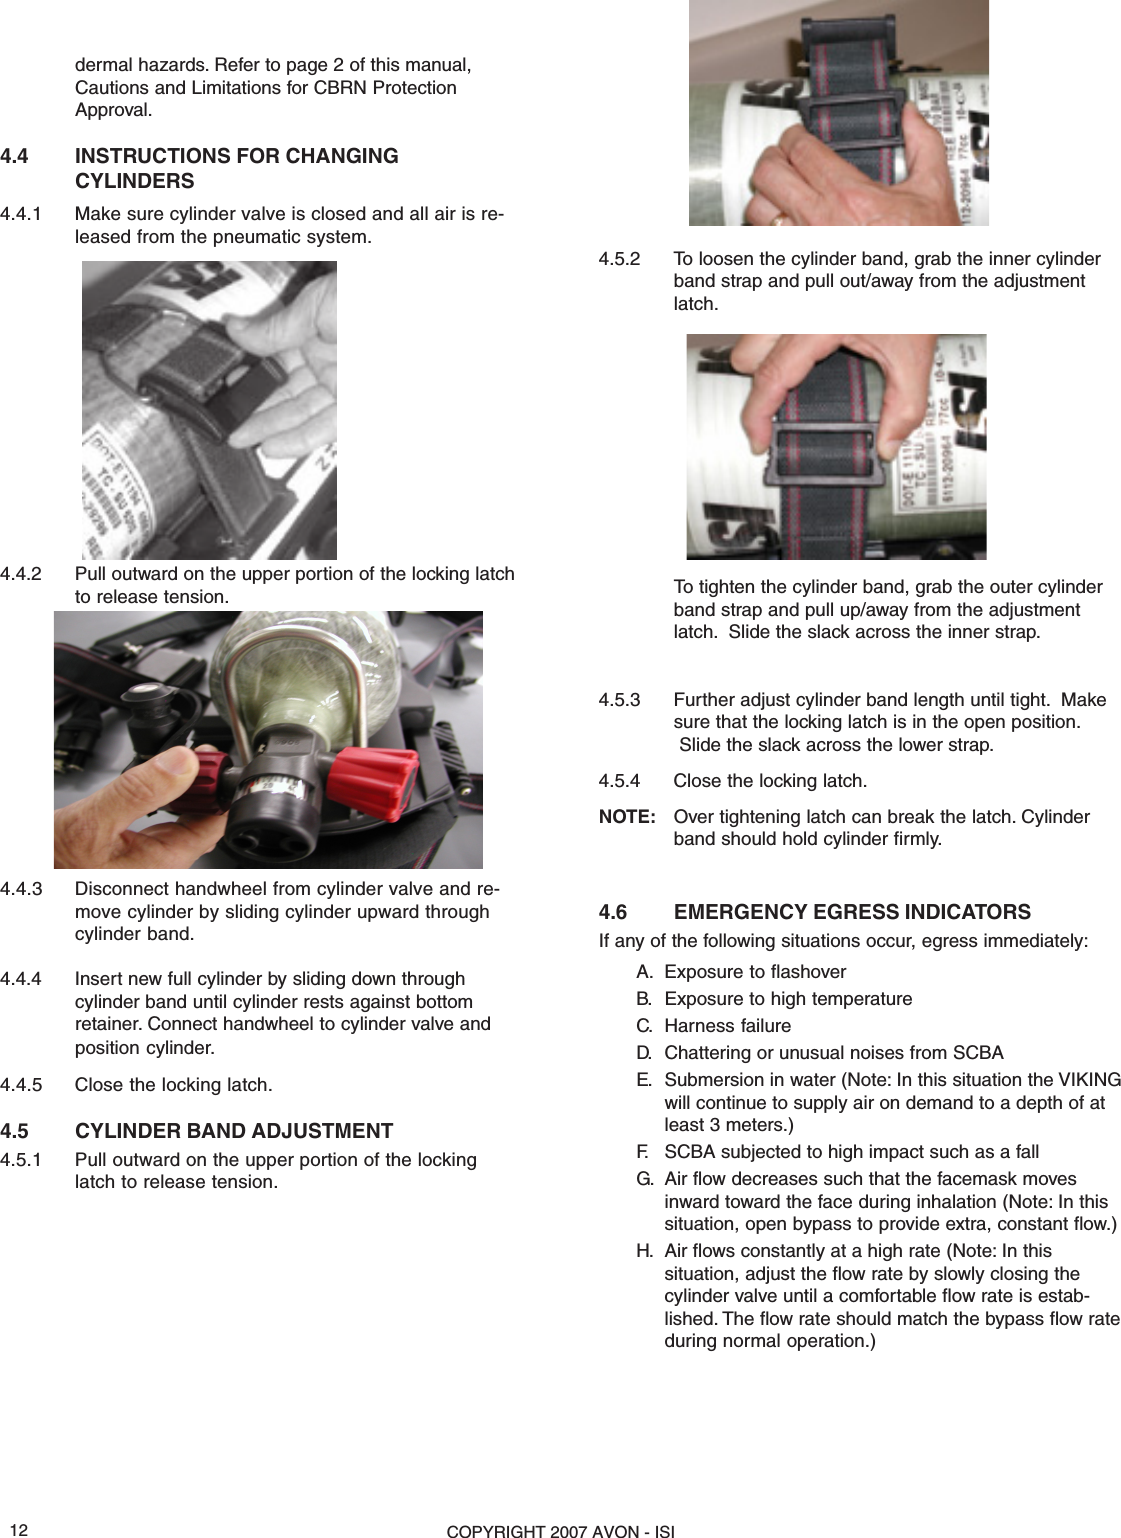 COPYRIGHT 2007 AVON - ISI12dermal hazards. Refer to page 2 of this manual,Cautions and Limitations for CBRN ProtectionApproval.4.4 INSTRUCTIONS FOR CHANGINGCYLINDERS4.4.1 Make sure cylinder valve is closed and all air is re-leased from the pneumatic system.4.4.2 Pull outward on the upper portion of the locking latchto release tension.4.4.3 Disconnect handwheel from cylinder valve and re-move cylinder by sliding cylinder upward throughcylinder band.4.4.4 Insert new full cylinder by sliding down throughcylinder band until cylinder rests against bottomretainer. Connect handwheel to cylinder valve andposition cylinder.4.4.5 Close the locking latch.4.5 CYLINDER BAND ADJUSTMENT4.5.1 Pull outward on the upper portion of the lockinglatch to release tension.4.5.2 To loosen the cylinder band, grab the inner cylinderband strap and pull out/away from the adjustmentlatch.To tighten the cylinder band, grab the outer cylinderband strap and pull up/away from the adjustmentlatch.  Slide the slack across the inner strap.4.5.3 Further adjust cylinder band length until tight.  Makesure that the locking latch is in the open position. Slide the slack across the lower strap.4.5.4 Close the locking latch.NOTE: Over tightening latch can break the latch. Cylinderband should hold cylinder firmly.4.6 EMERGENCY EGRESS INDICATORSIf any of the following situations occur, egress immediately:A. Exposure to flashoverB. Exposure to high temperatureC. Harness failureD. Chattering or unusual noises from SCBAE. Submersion in water (Note: In this situation the VIKINGwill continue to supply air on demand to a depth of atleast 3 meters.)F. SCBA subjected to high impact such as a fallG. Air flow decreases such that the facemask movesinward toward the face during inhalation (Note: In thissituation, open bypass to provide extra, constant flow.)H. Air flows constantly at a high rate (Note: In thissituation, adjust the flow rate by slowly closing thecylinder valve until a comfortable flow rate is estab-lished. The flow rate should match the bypass flow rateduring normal operation.)